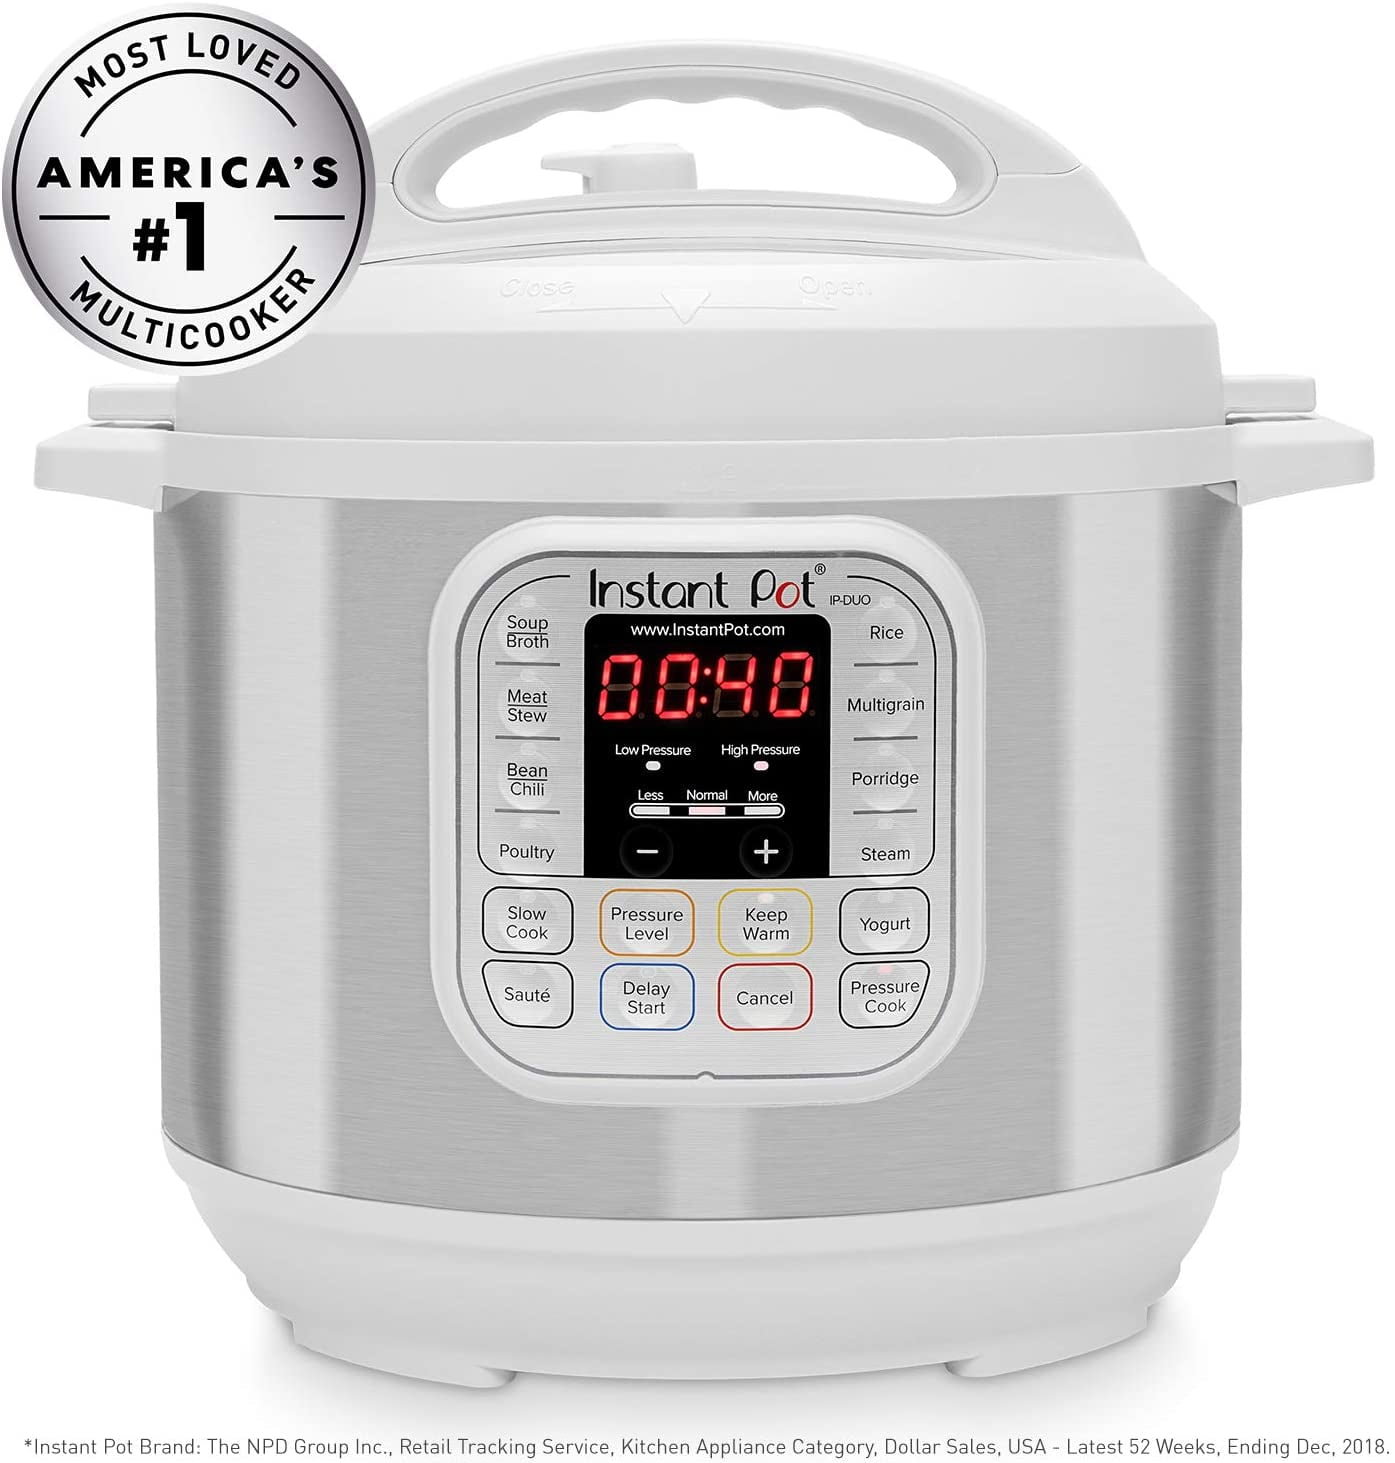 Instant Pot Duo Mini 7-in-1 Electric Pressure Cooker and Mitts ‚Äì Make  Yogurt, Rice, Slow Cook, Saut√©, Steam and More: Home & Kitchen 